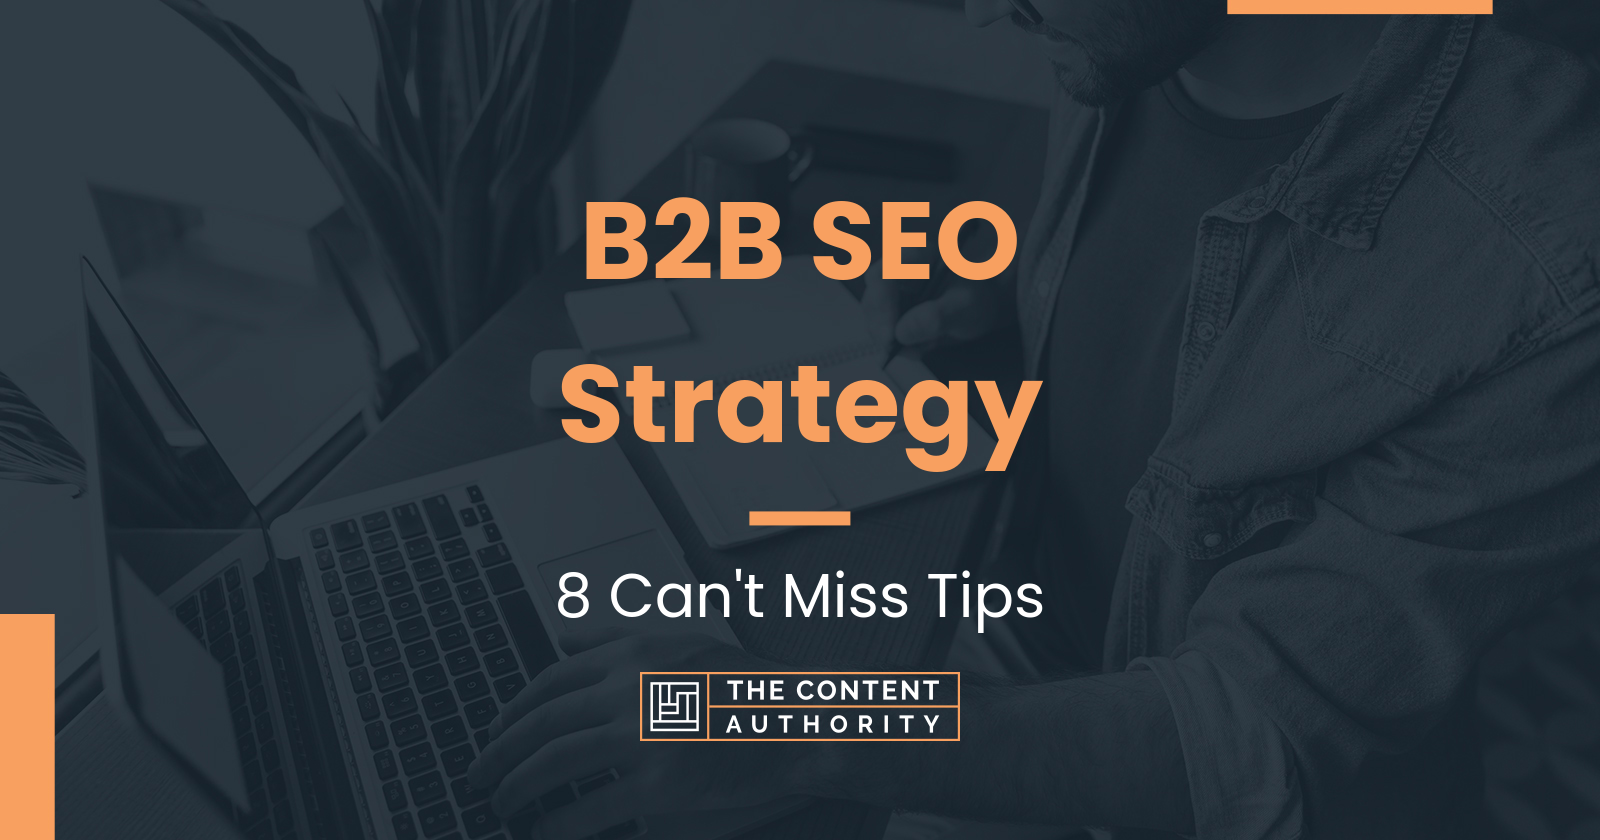 B2B SEO Strategy: 8 Can’t-Miss Tips for 2023